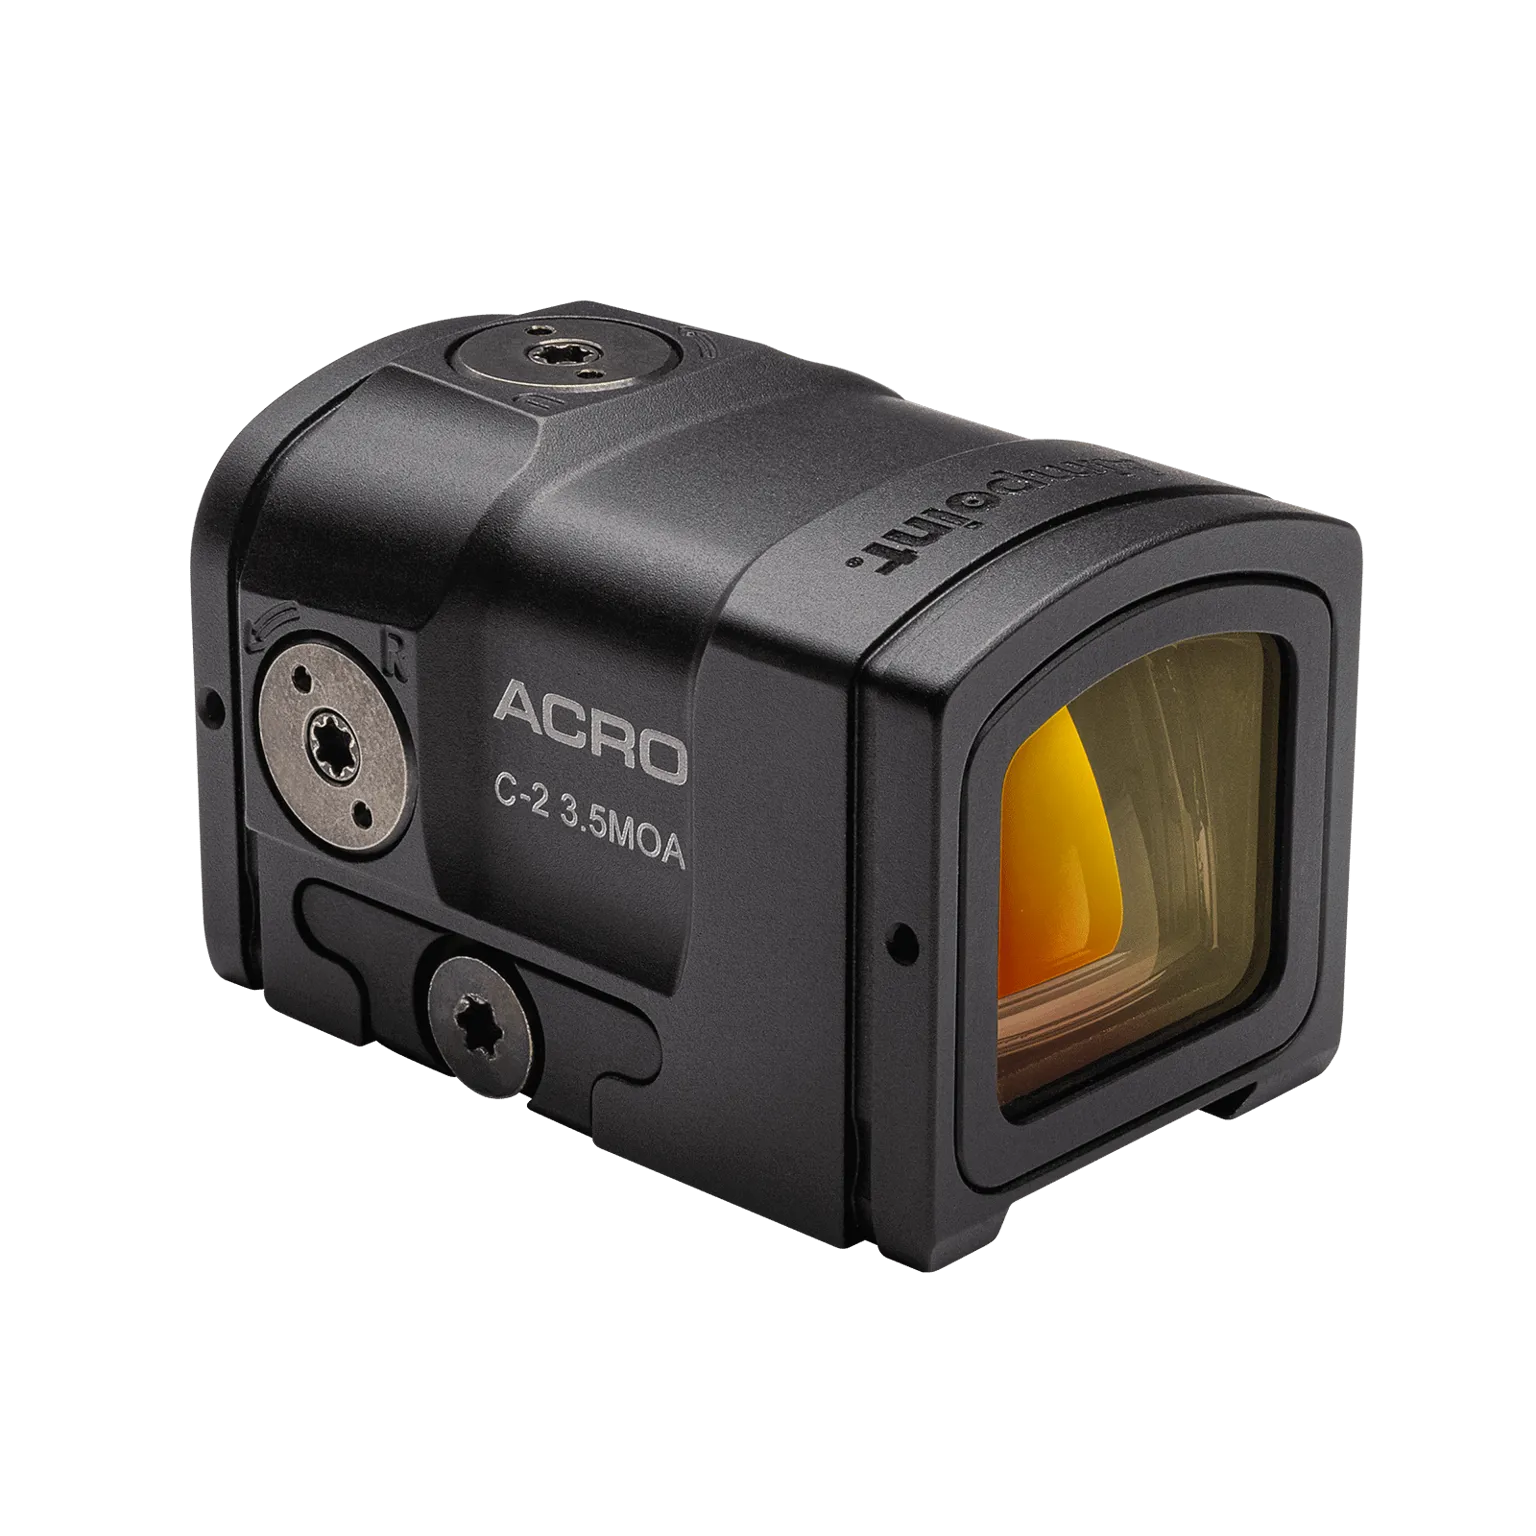 Acro C-2™ 3.5 MOA - Red dot reflex sight with integrated Acro™ interface - 3